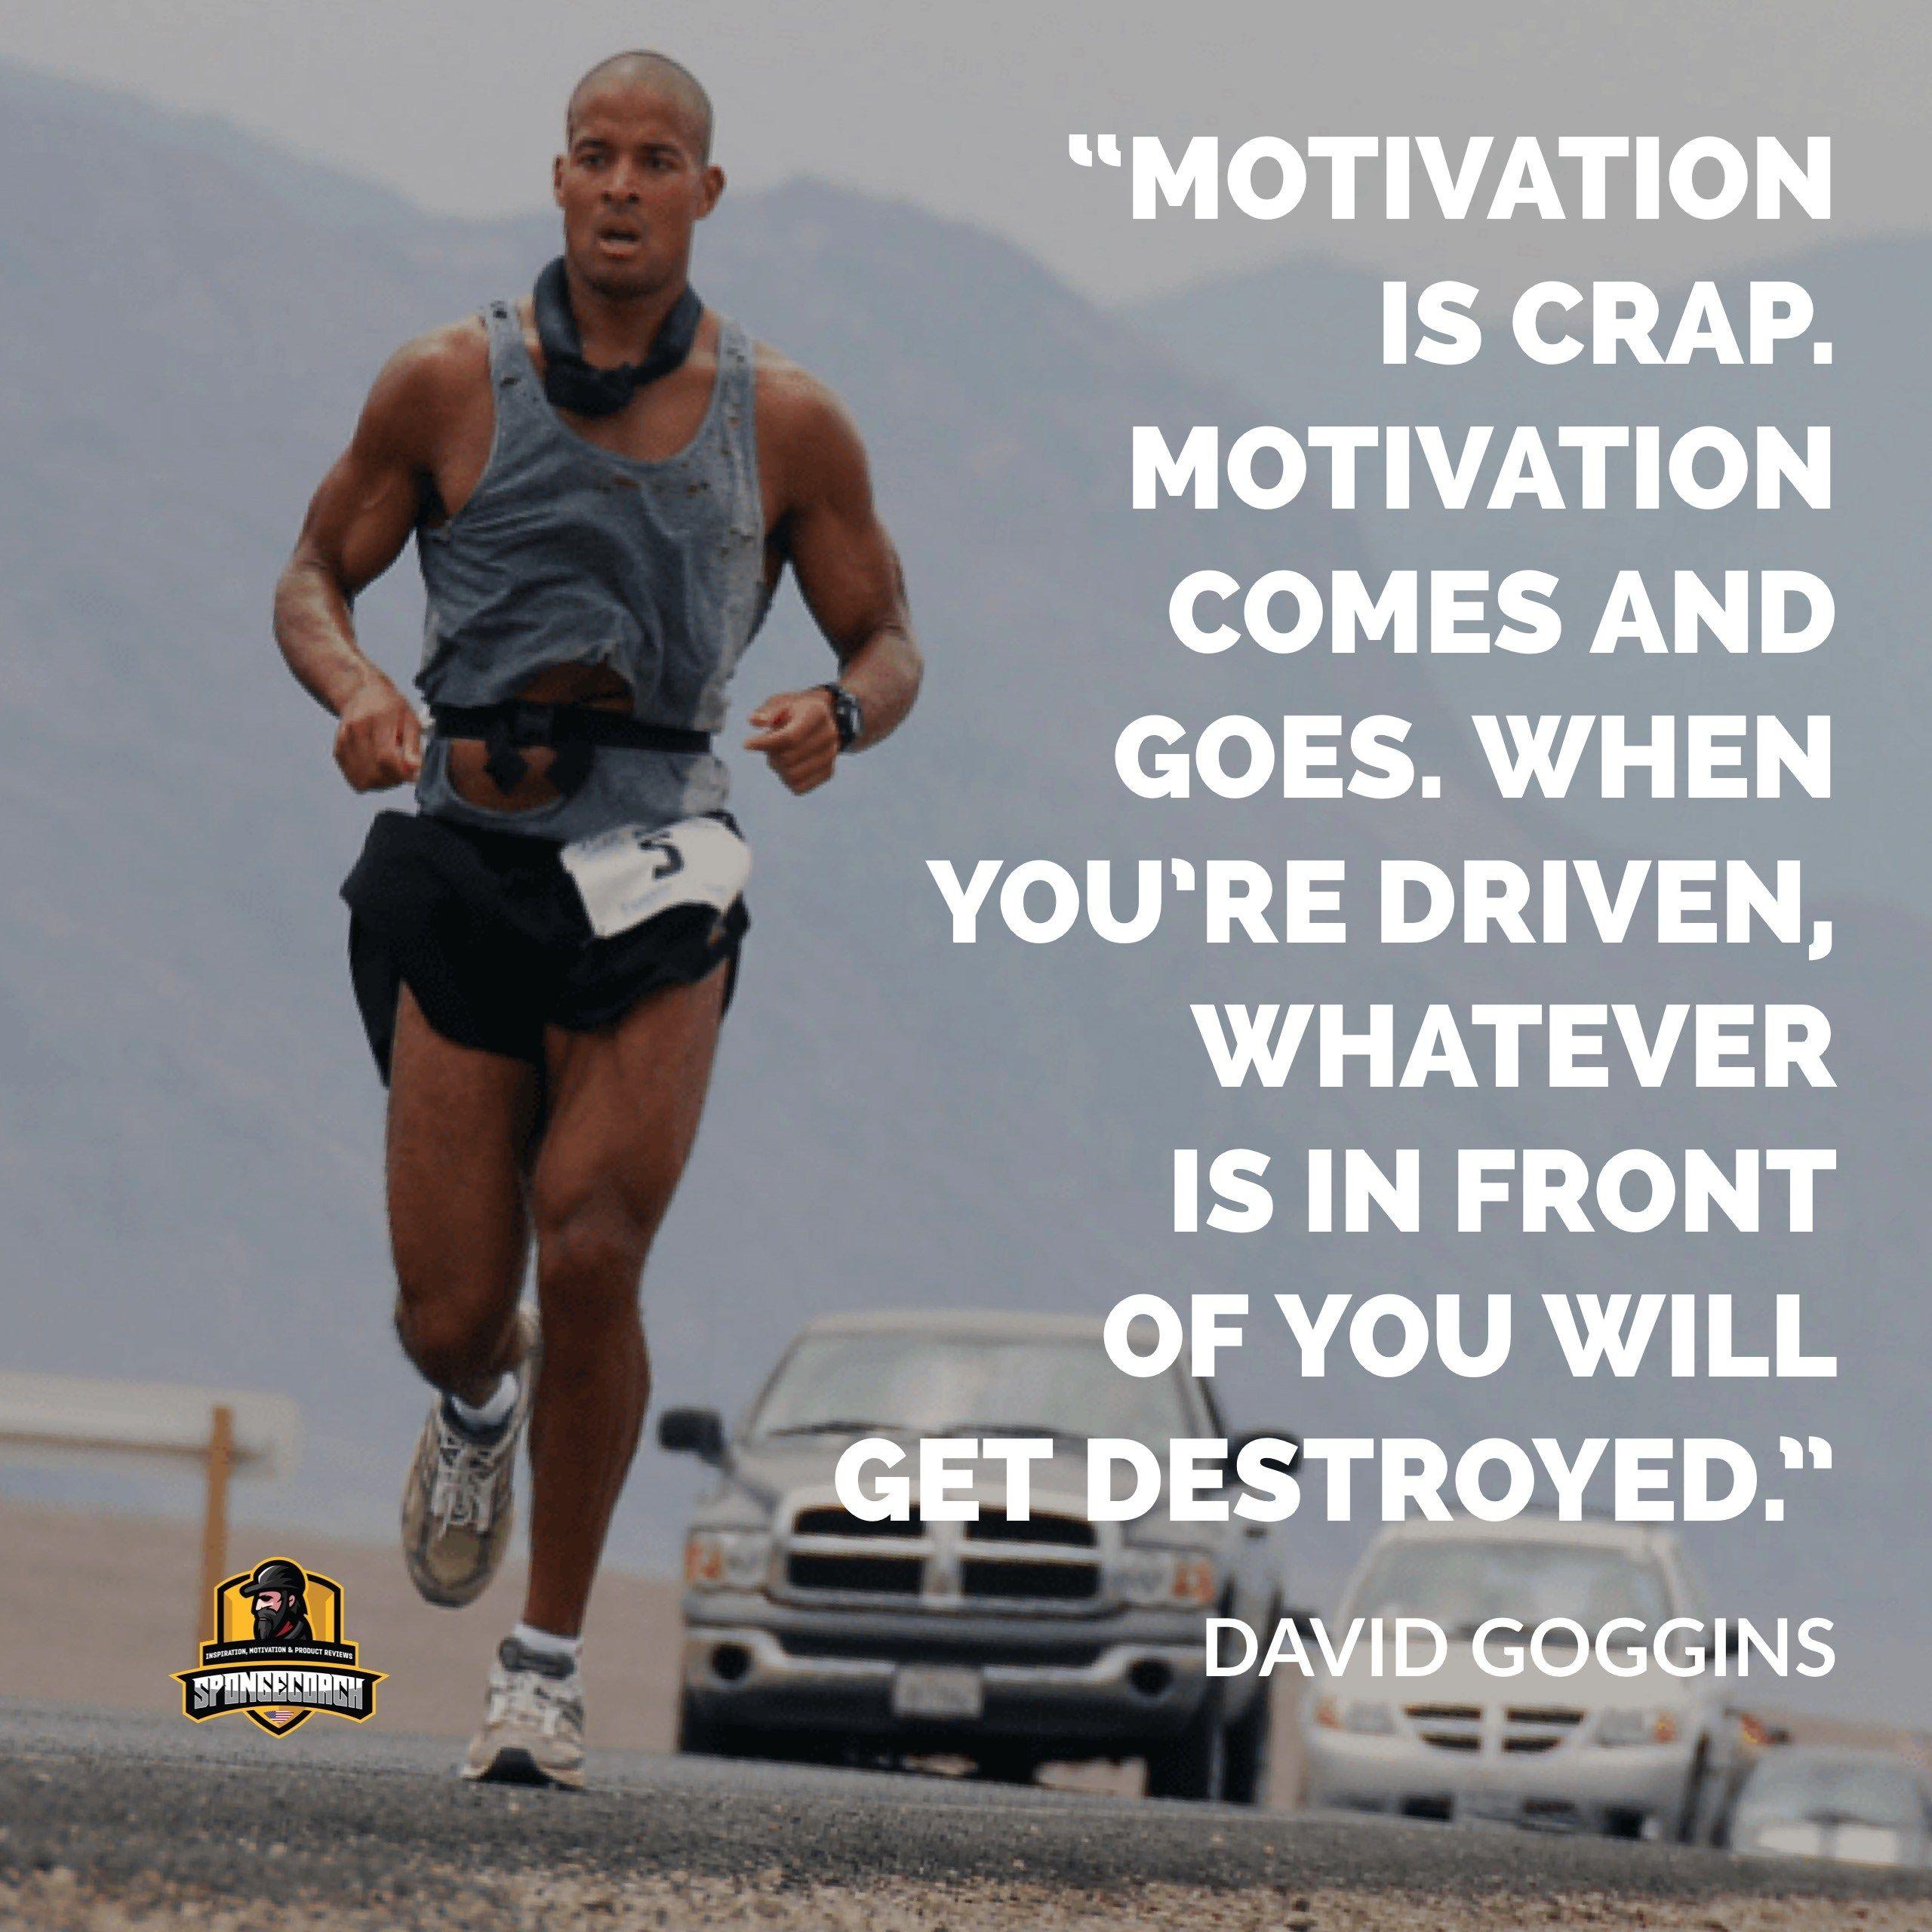 best david goggins quotes on self talk and visualization. Self